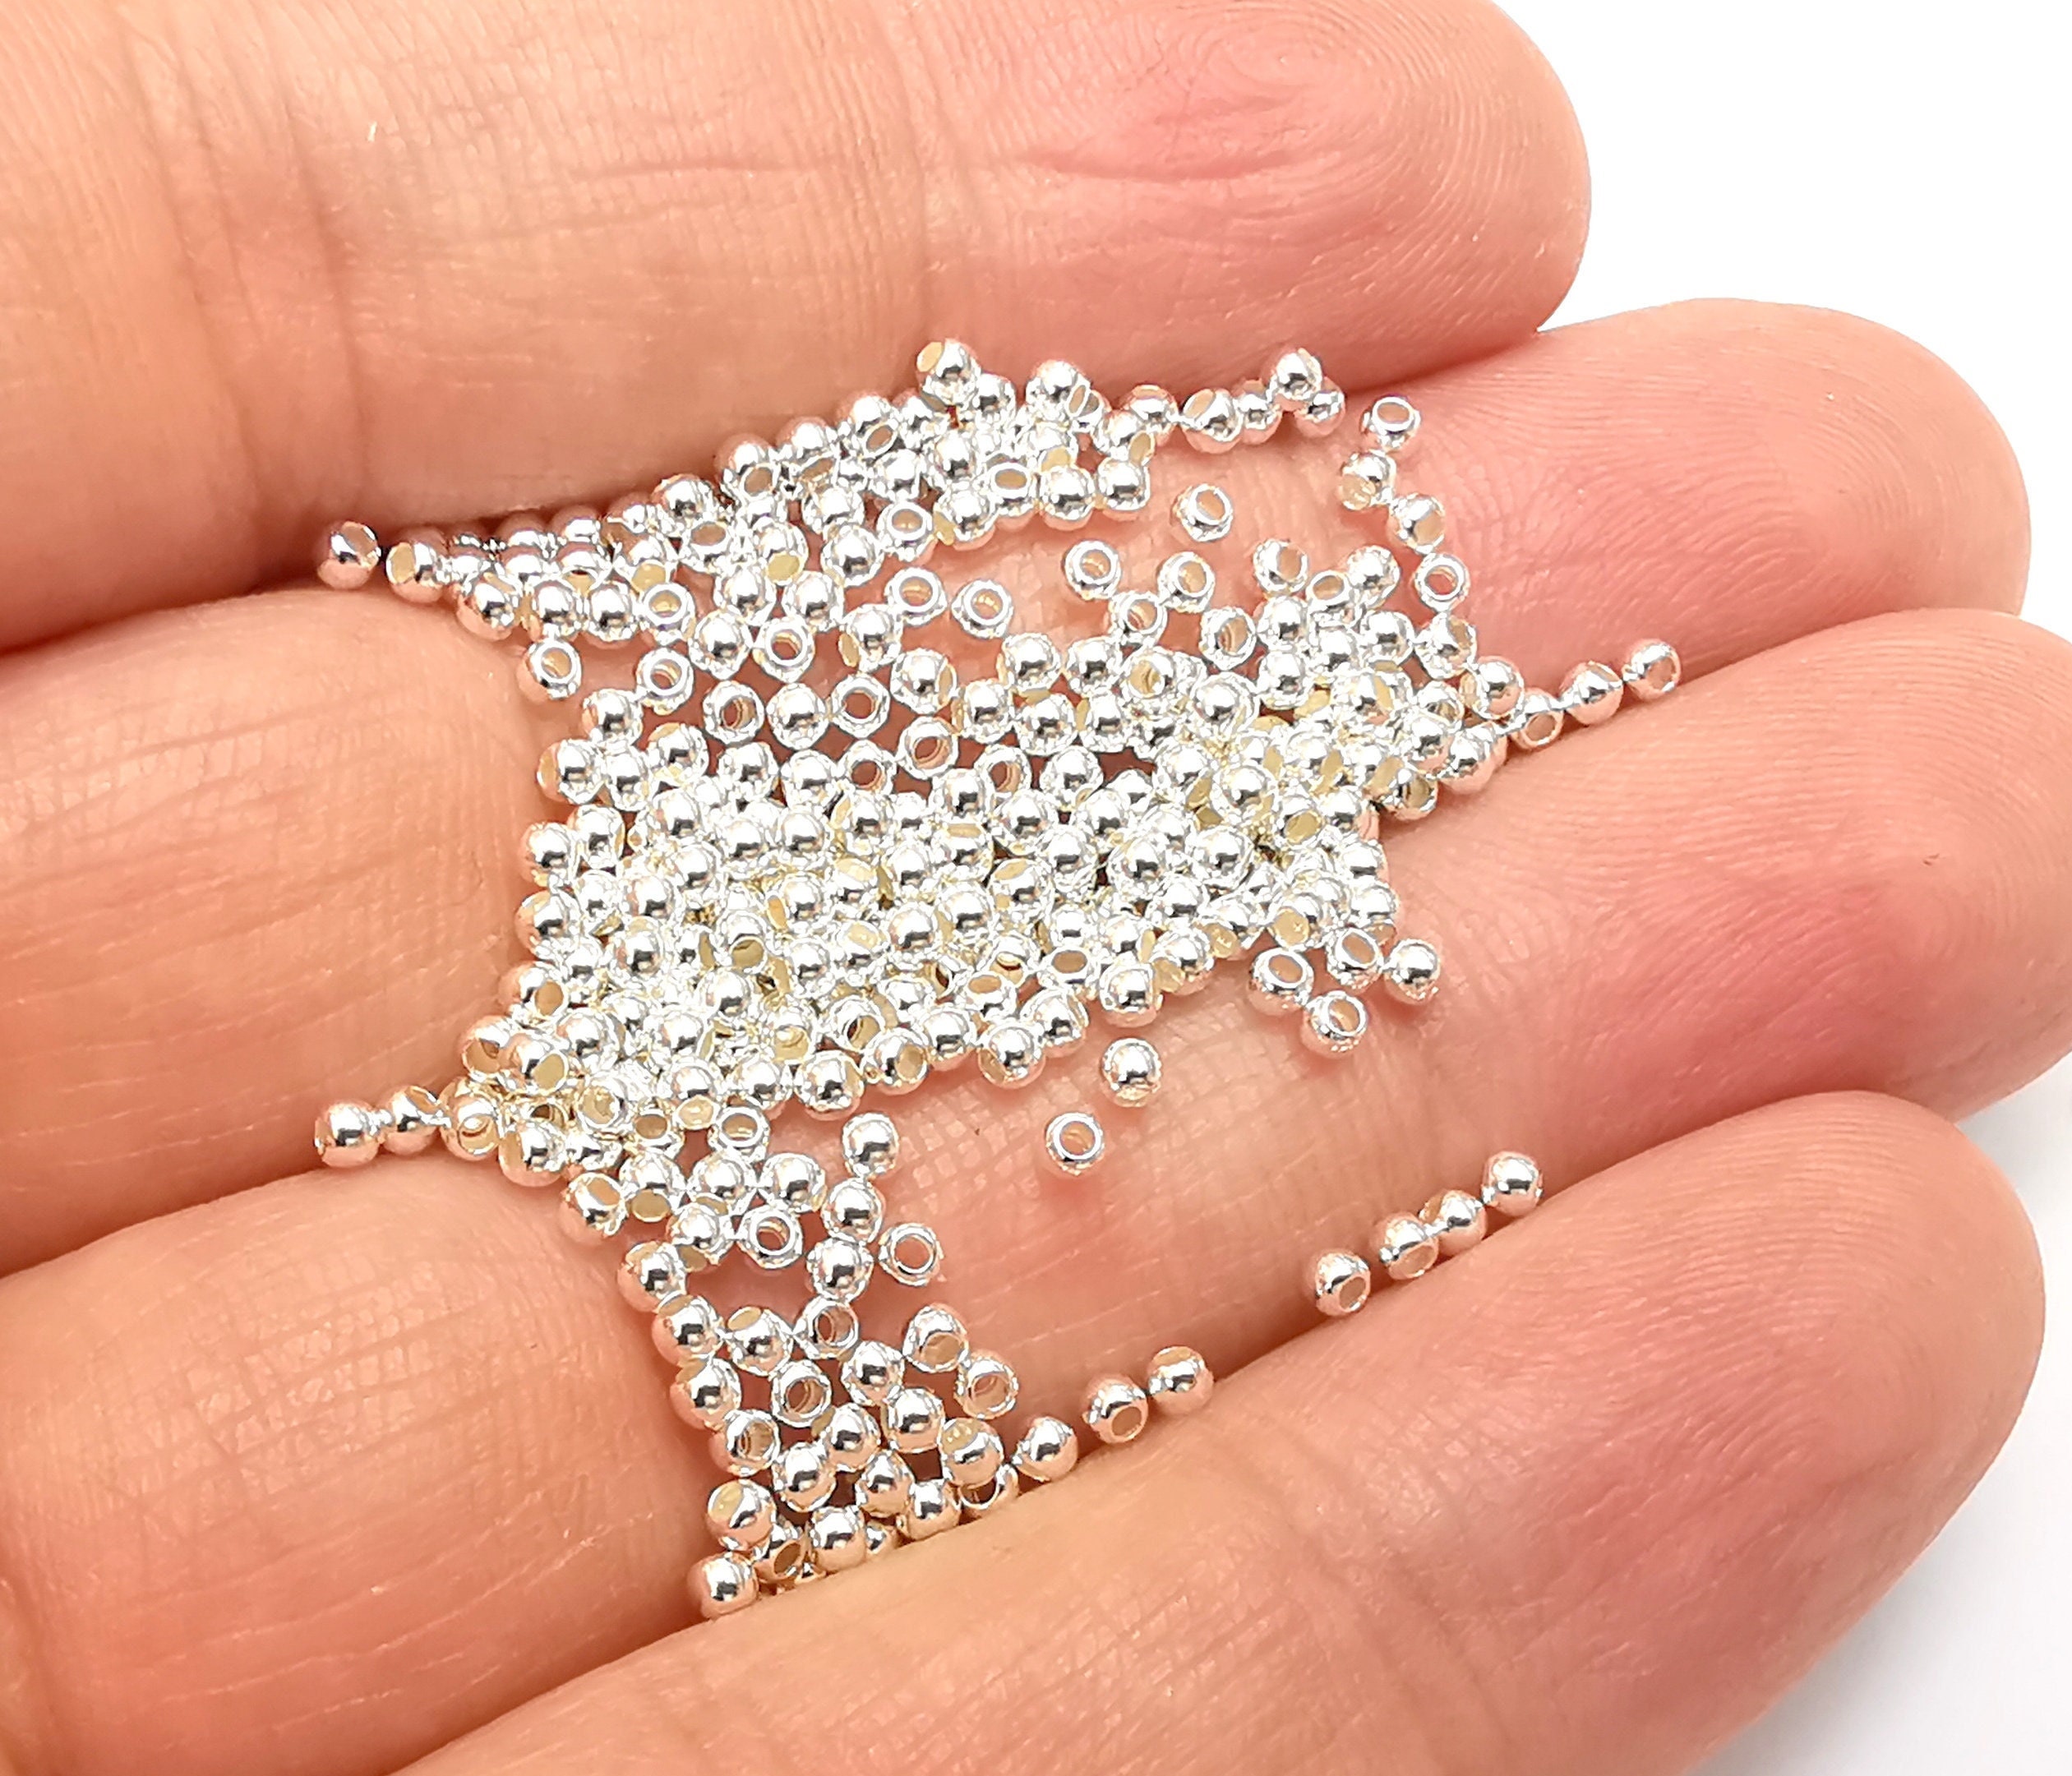 Tiny 2mm Sterling Silver Beads Faceted Round 100 pcs. S-152